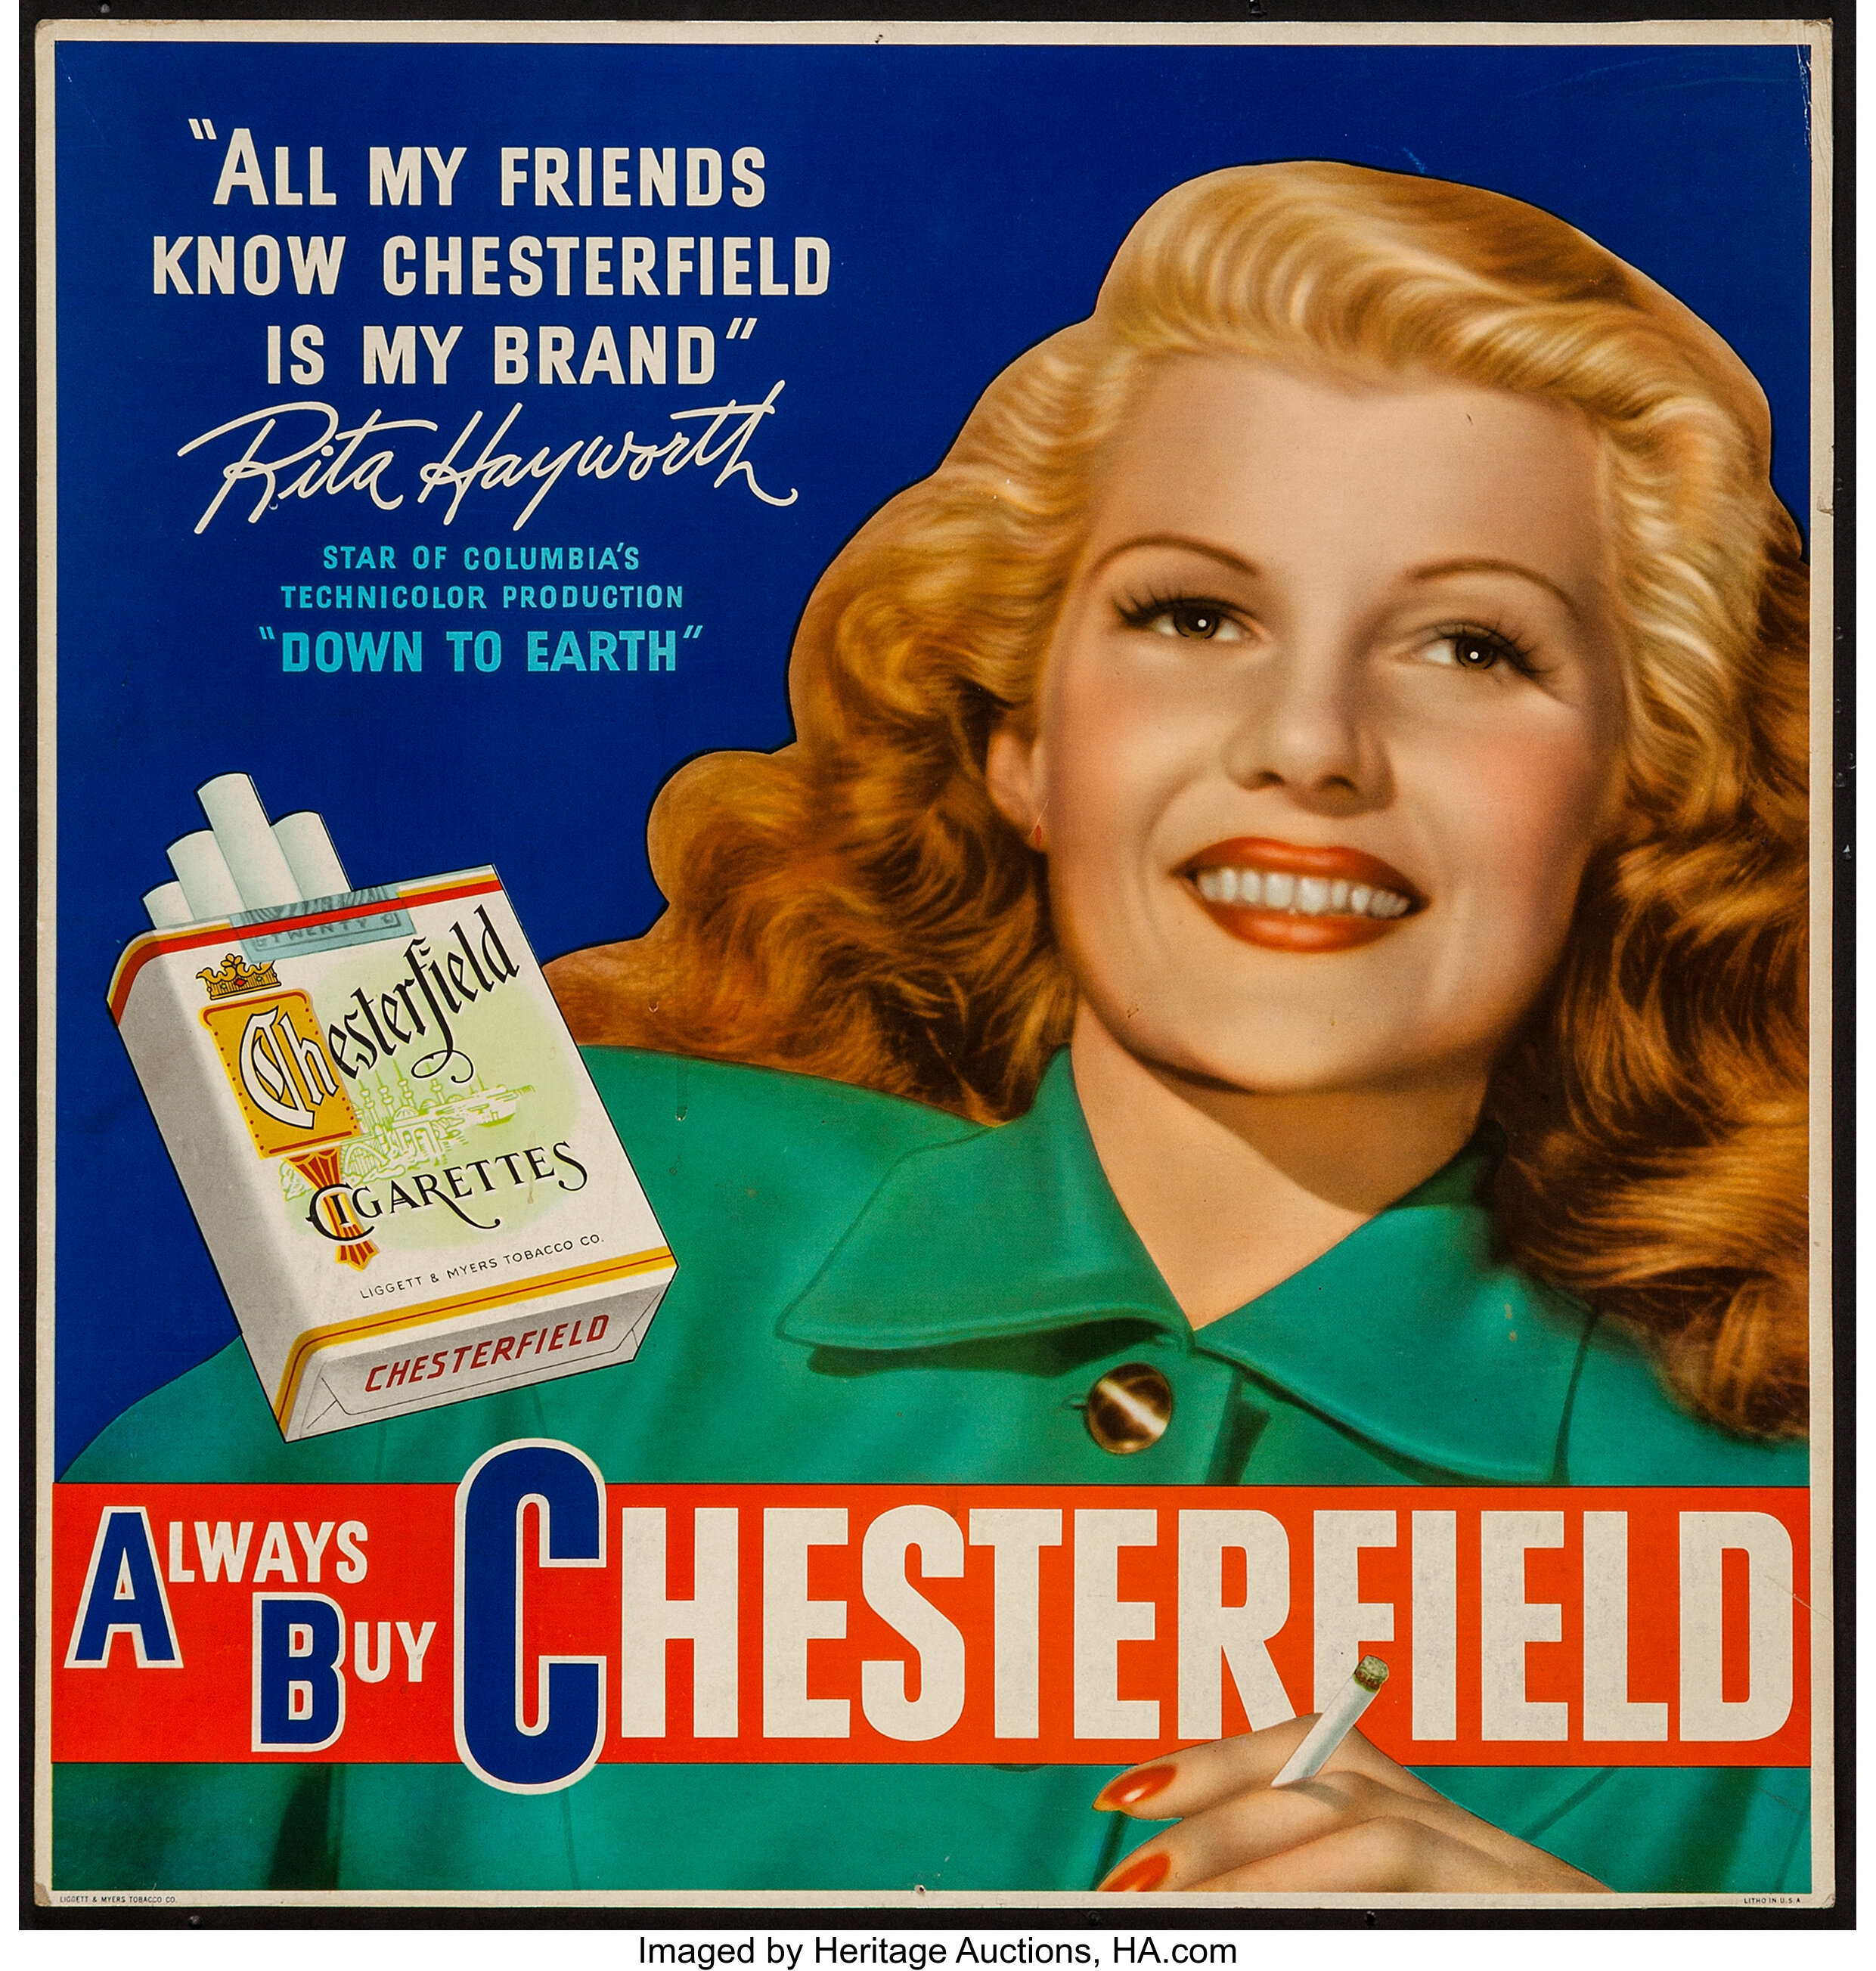 Rita Hayworth Advertising Chesterfield Cigarettes Liggett And Meyers Lot 50383 Heritage Auctions 